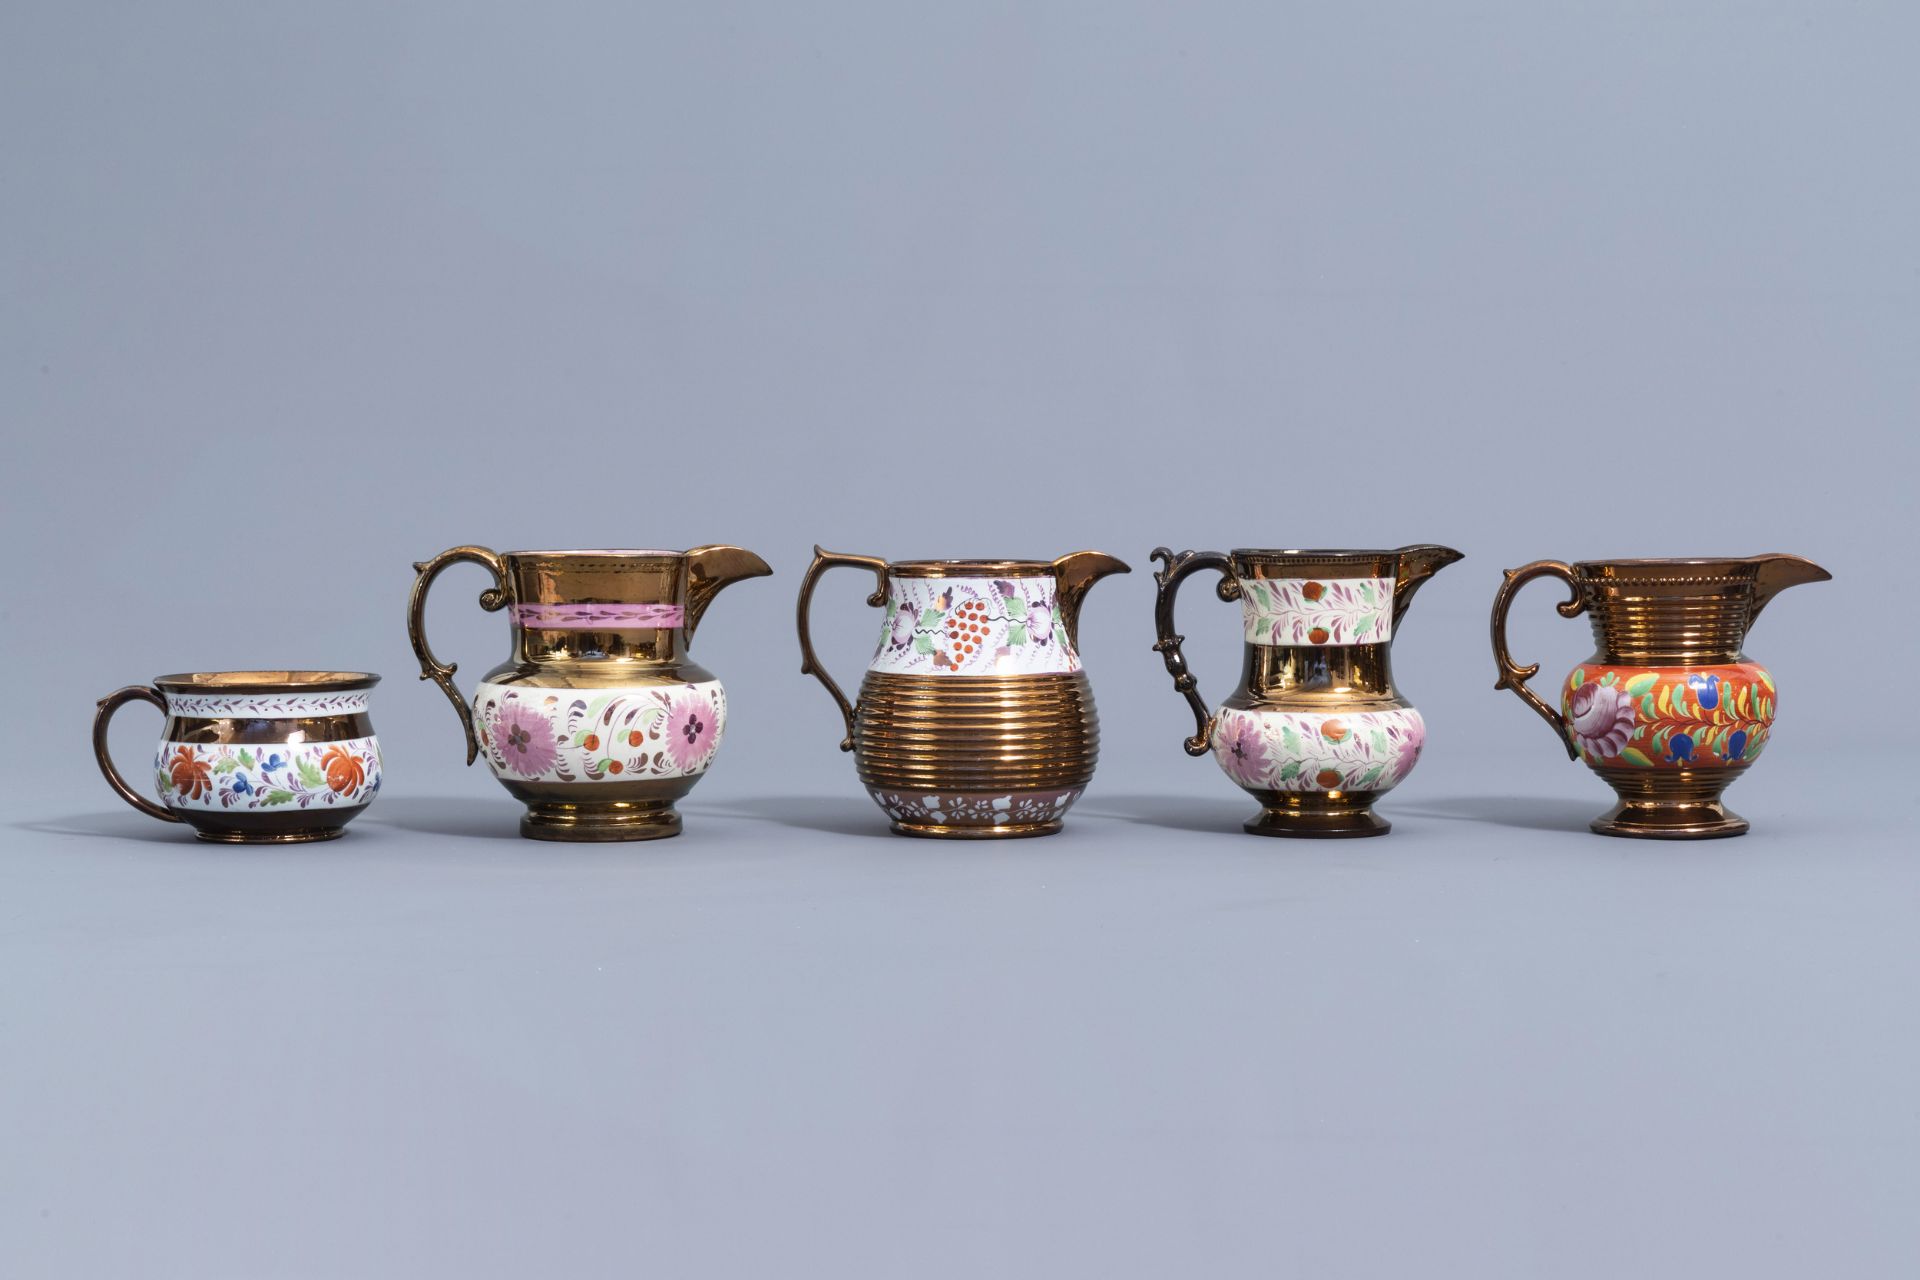 A varied collection of English lustreware items with polychrome floral design, 19th C. - Image 7 of 64